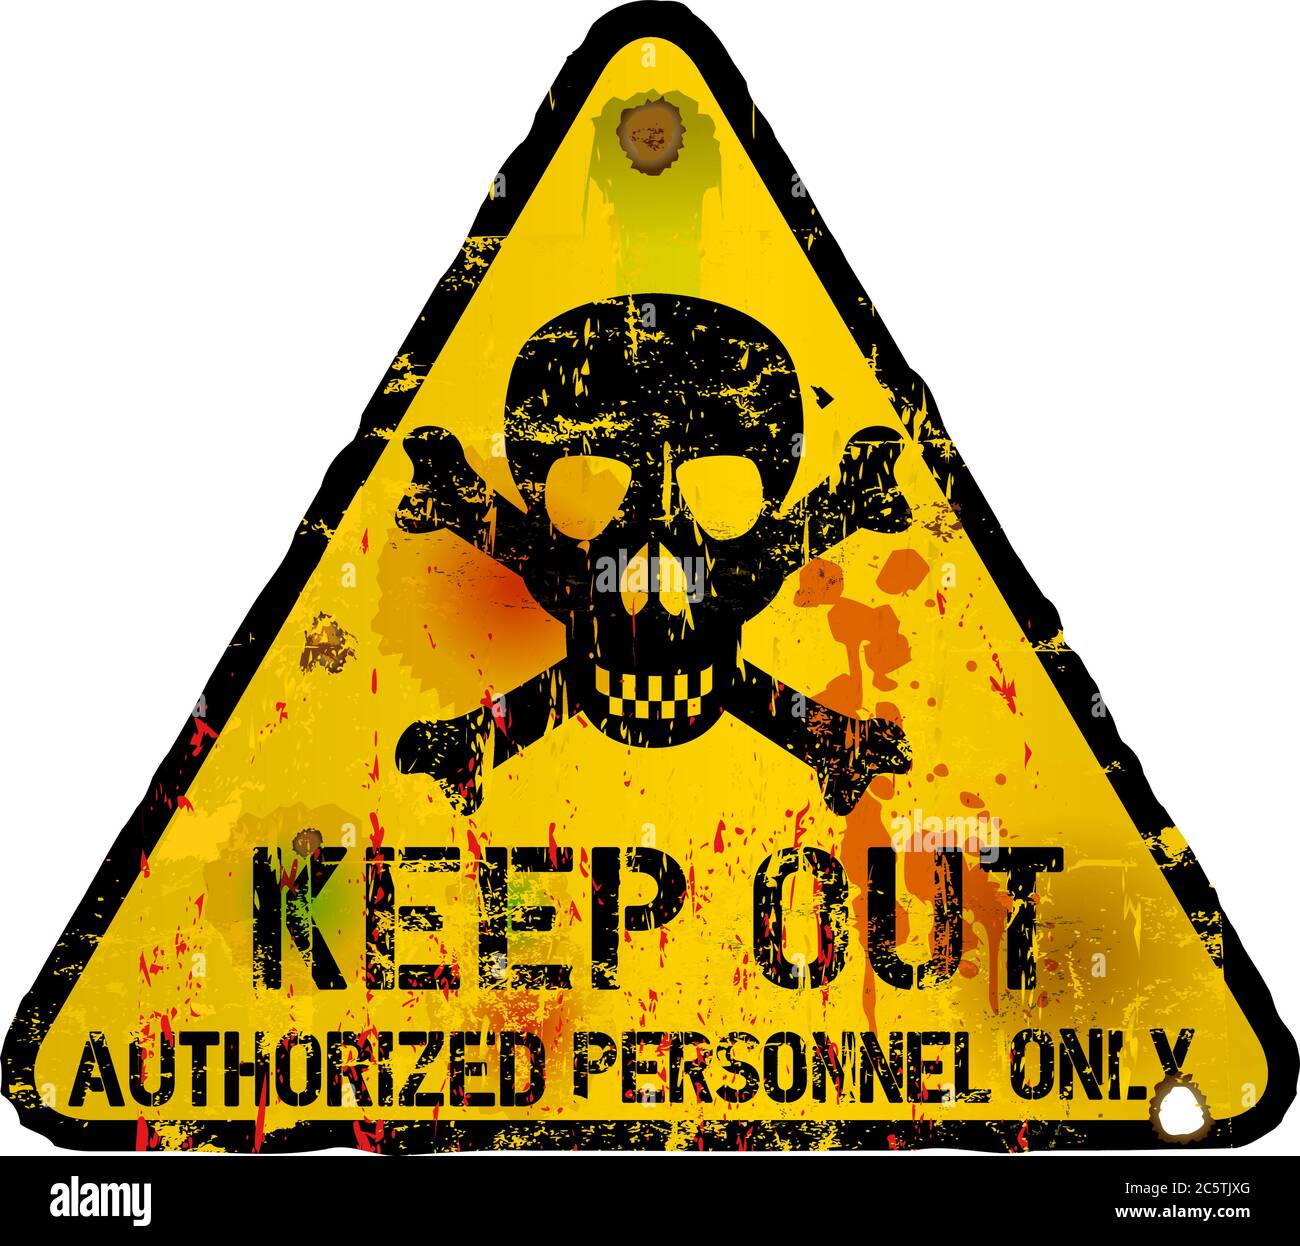 Keep out sign, warning sign,authorized personel only sign, grungy vector eps 10 Stock Vector